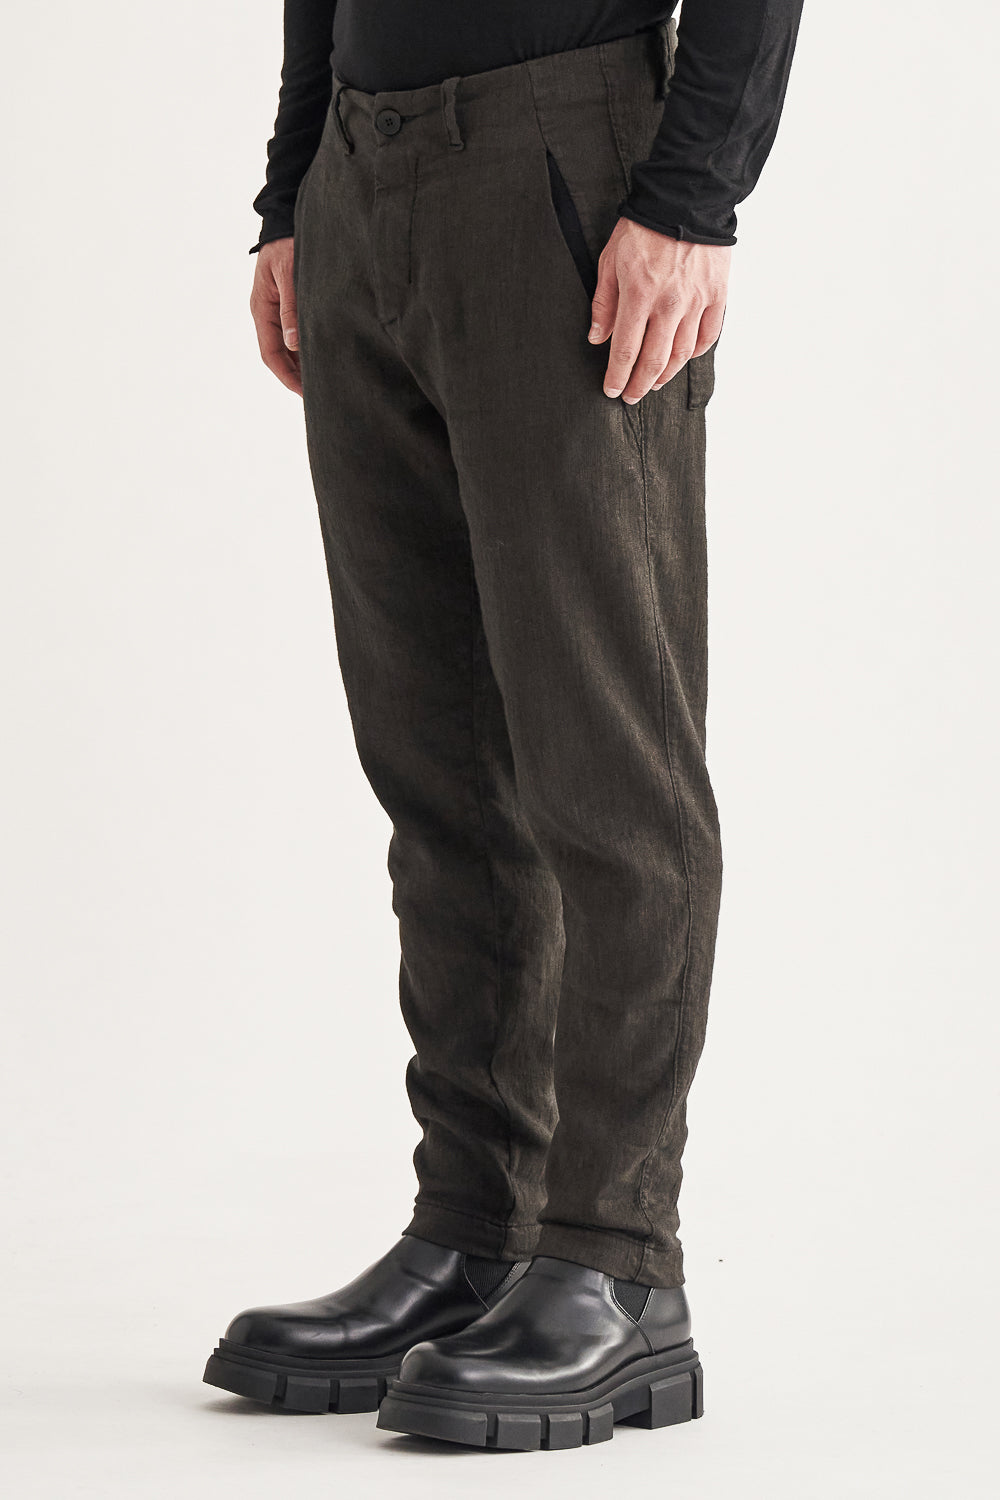 Buy the Transit Linen/Cotton Broken Twill Chinos in Charcoal at Intro. Spend £50 for free UK delivery. Official stockists. We ship worldwide.